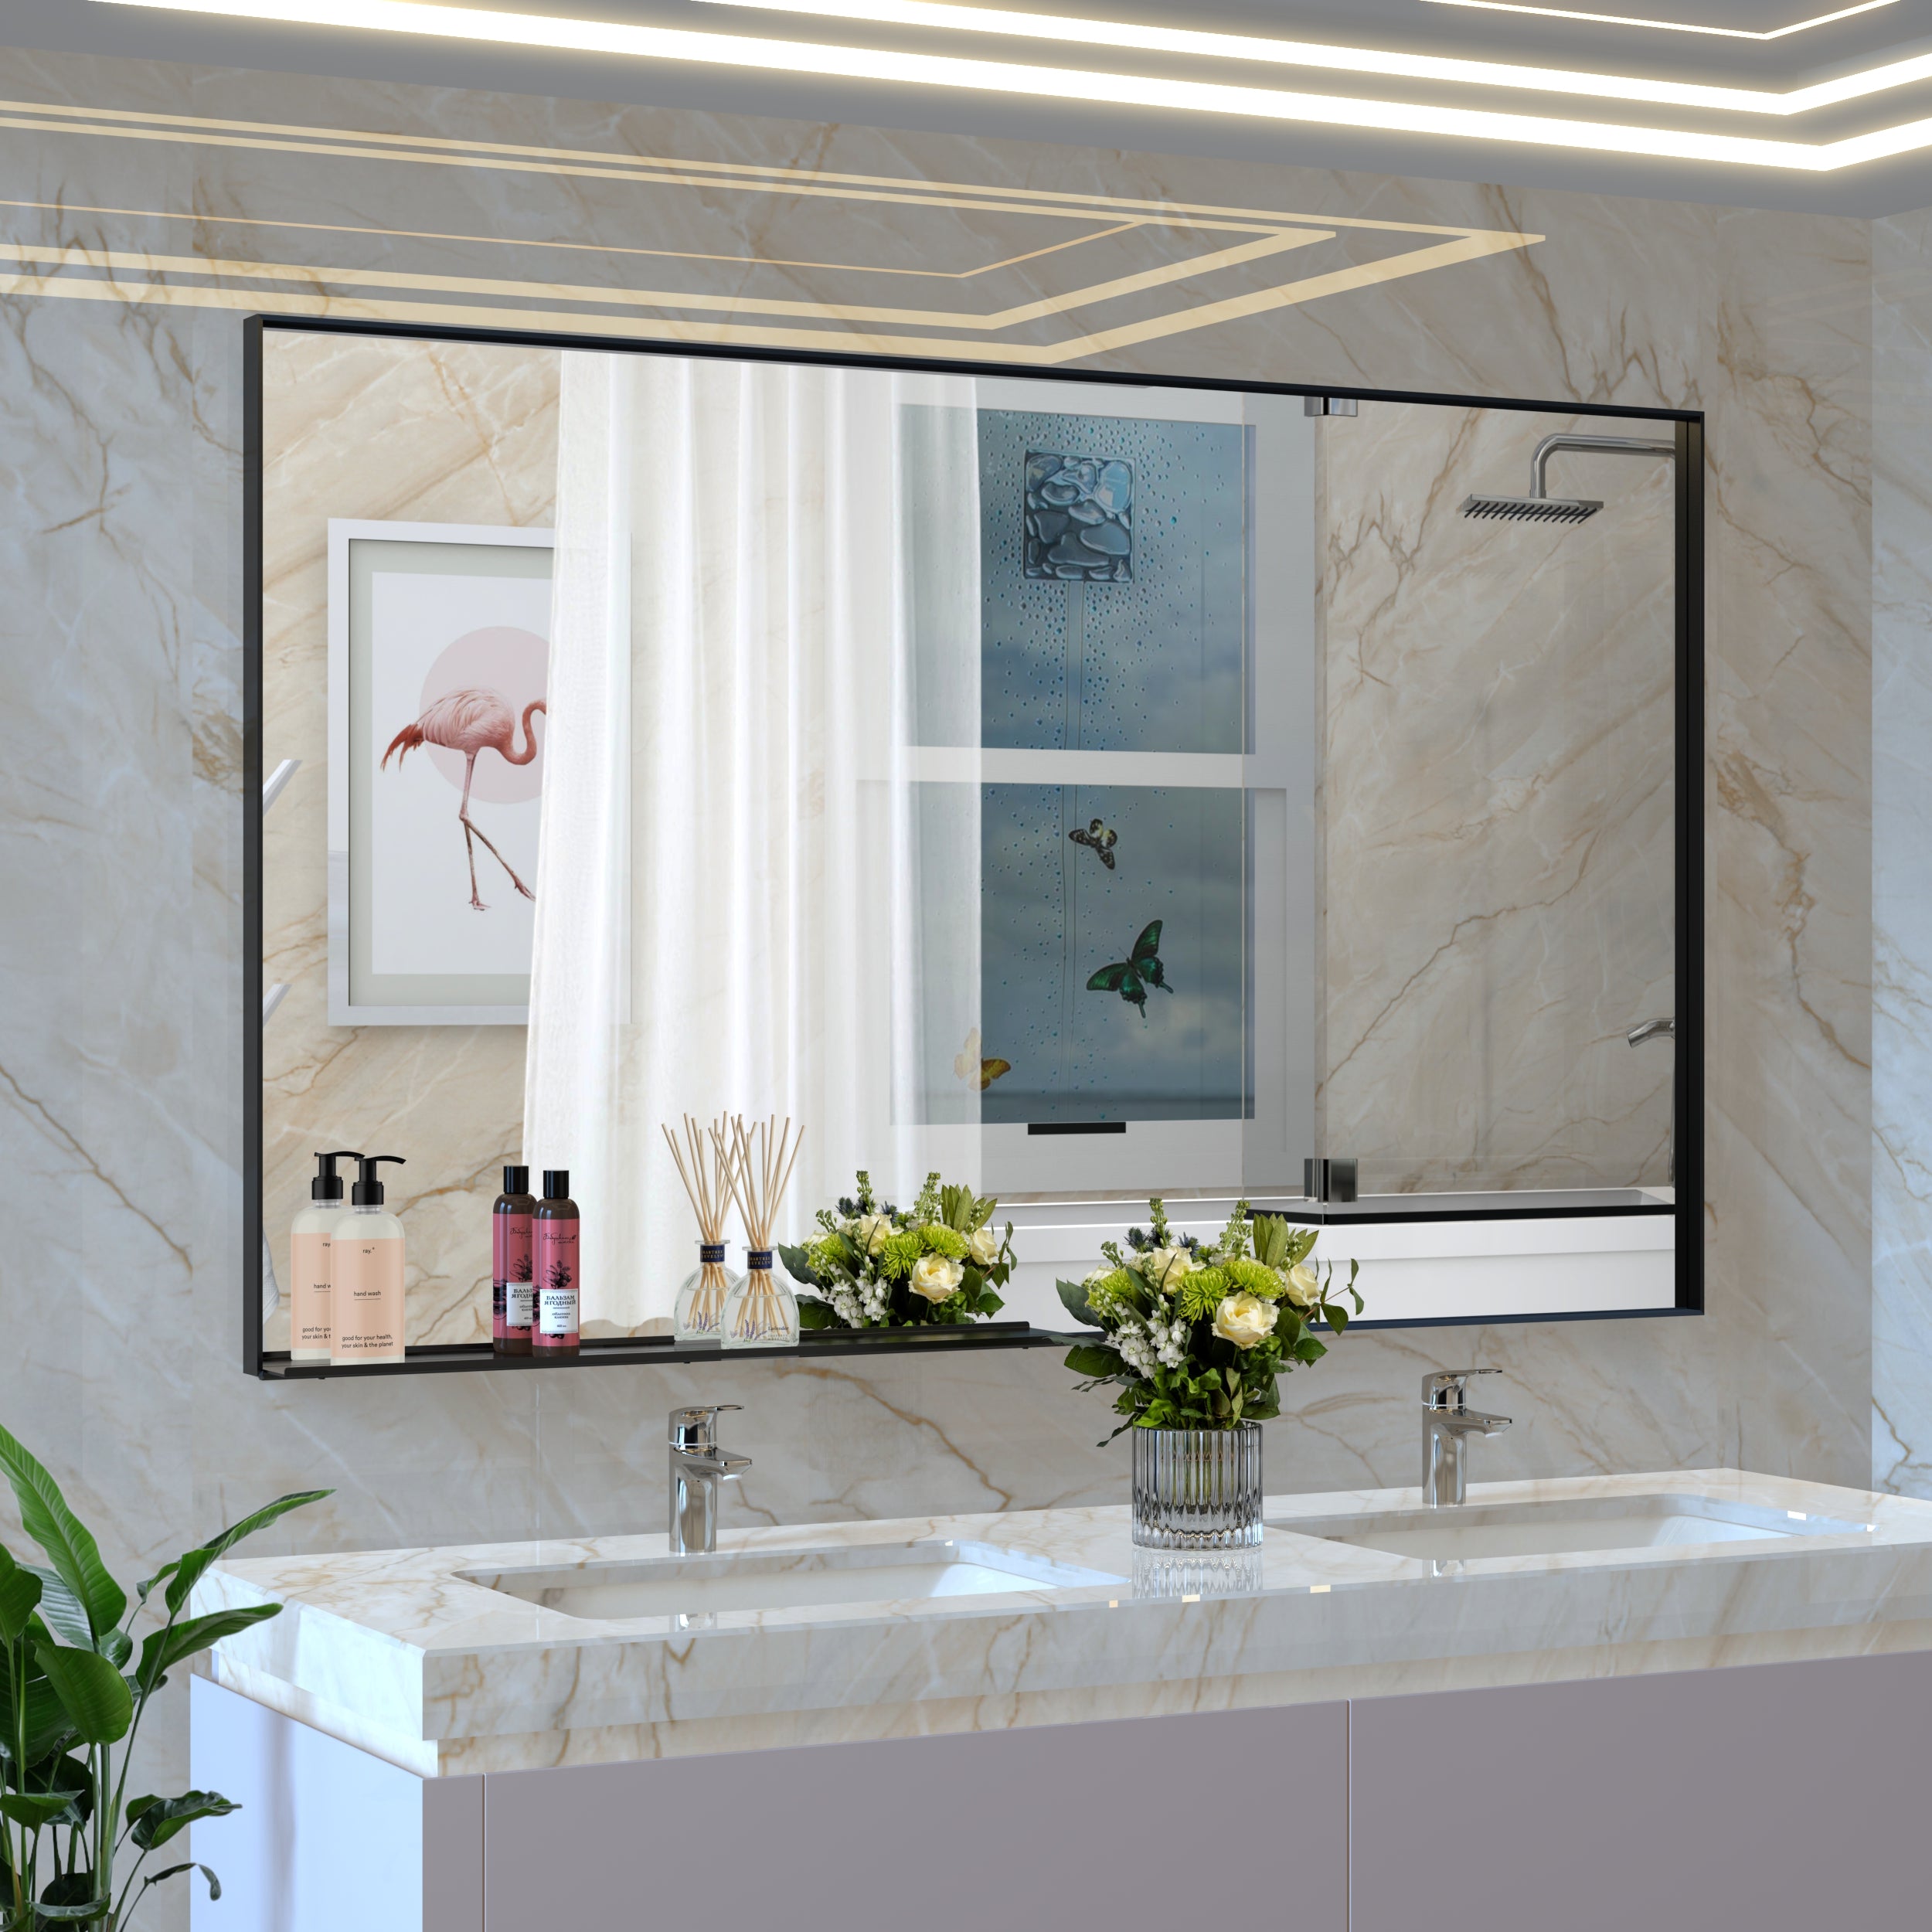 60*36" Oversized Modern Rectangle Bathroom Mirror with Balck Frame Decorative Large Wall Mirrors for Bathroom Living Room Bedroom Vertical or Horizontal Wall Mounted mirror with Aluminum Frame